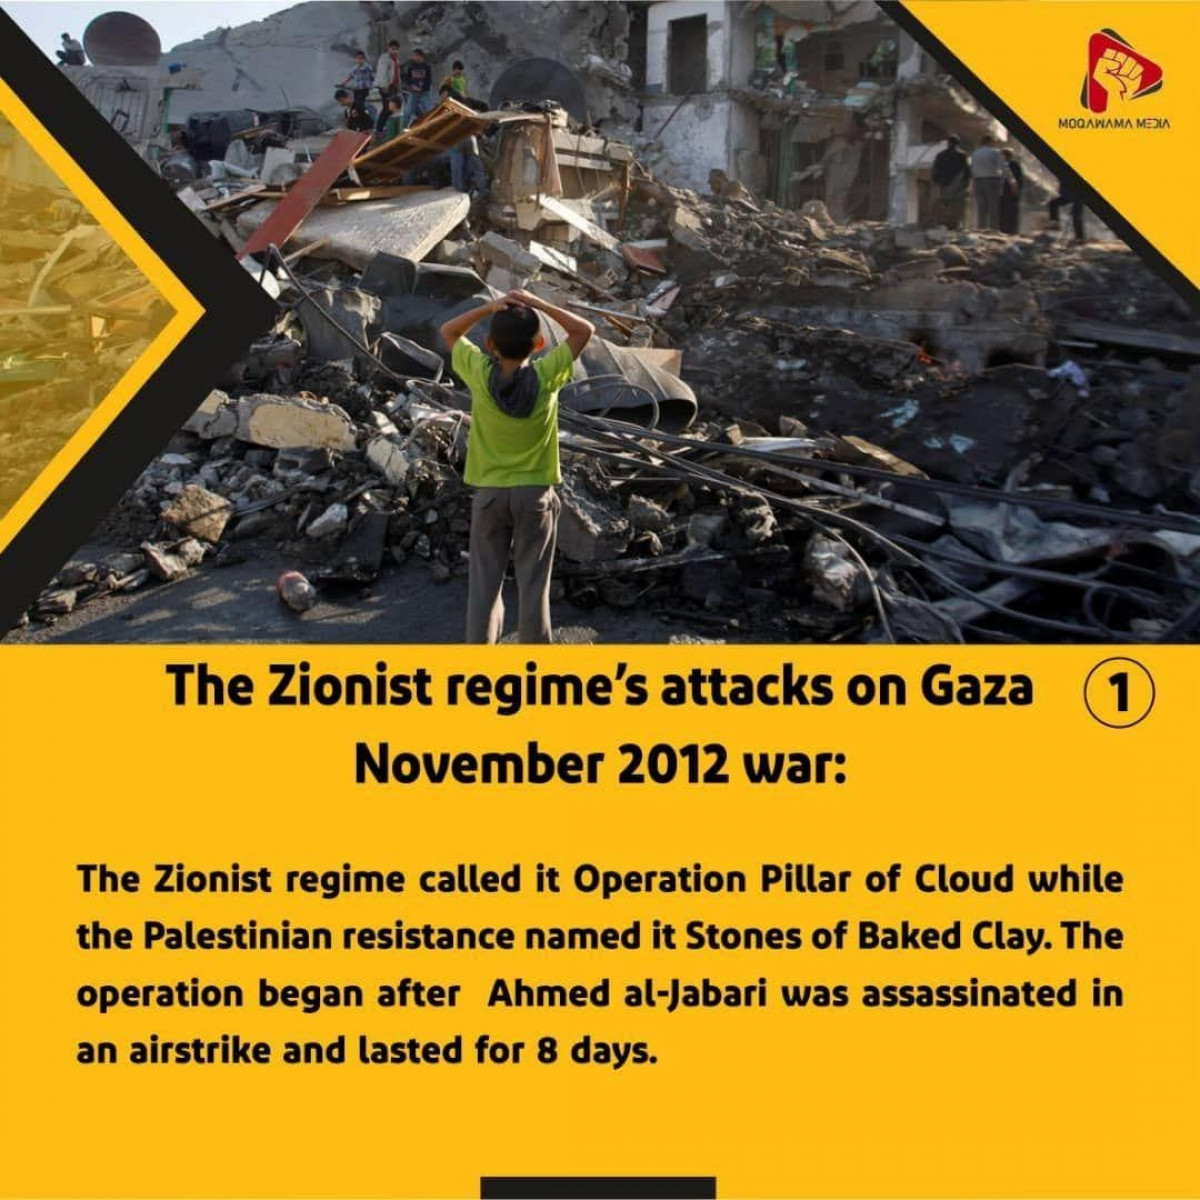 Collection of posters: The Zionist regime's attacks on Gaza November 2012 war